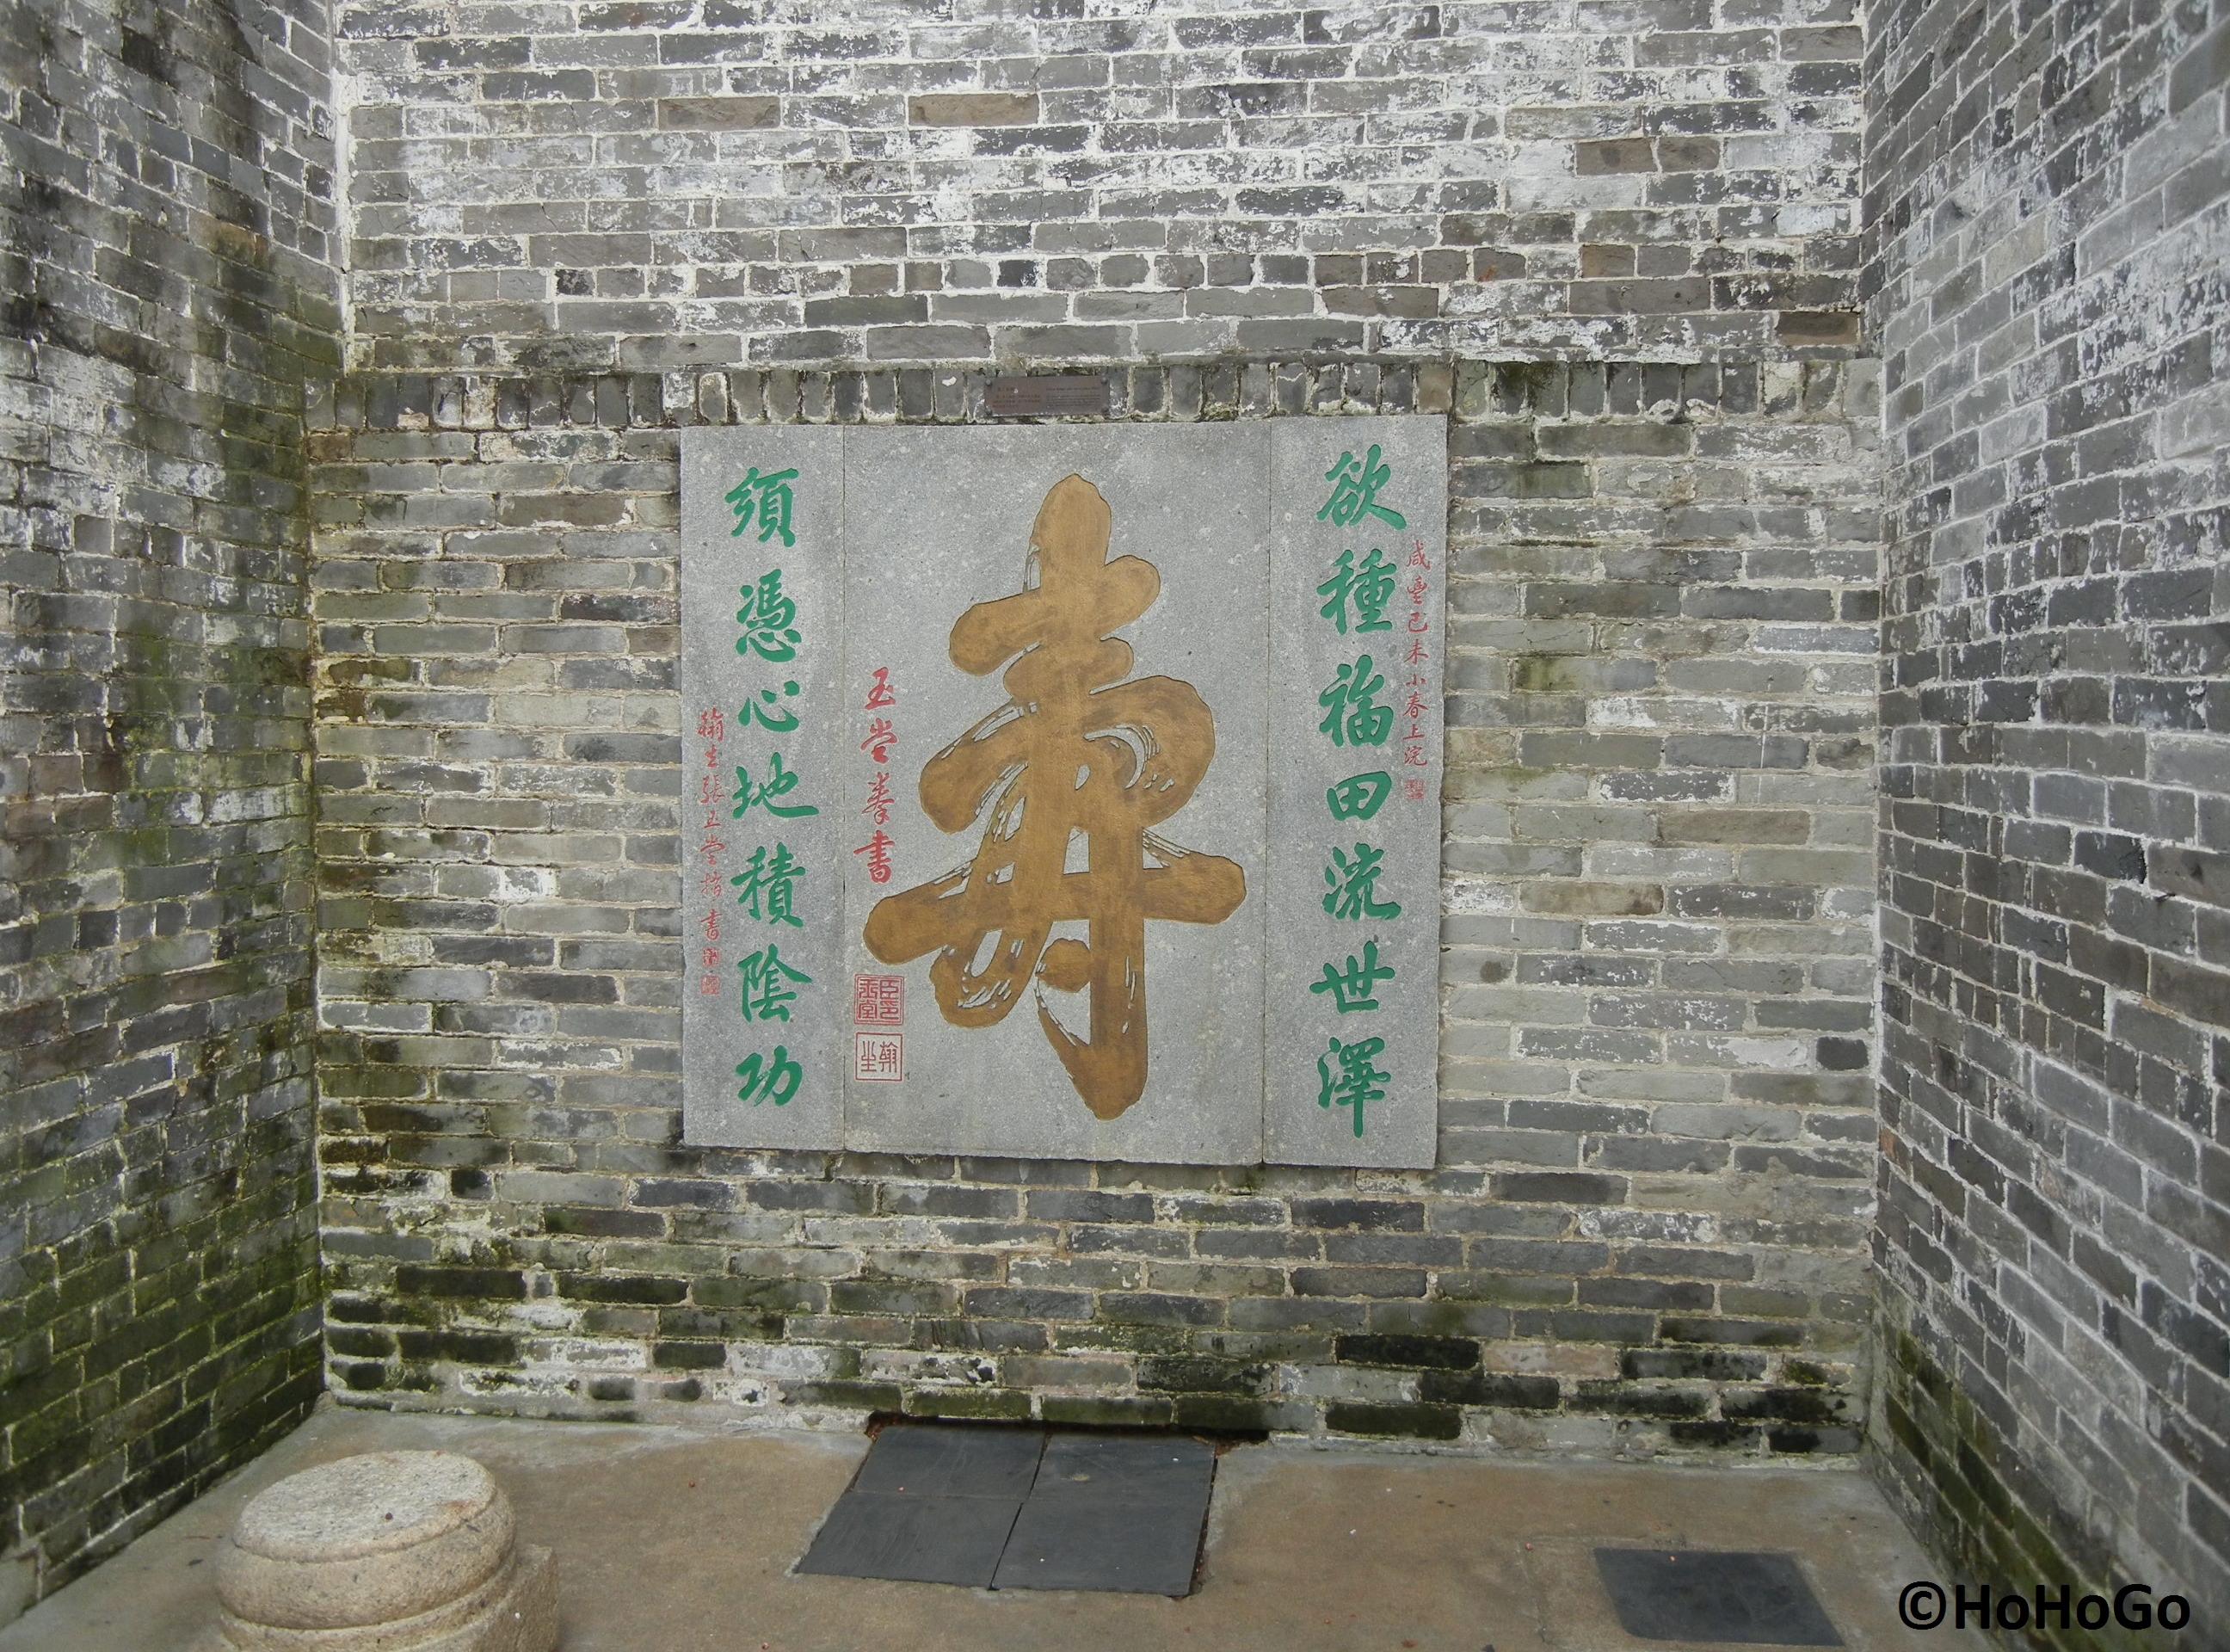 Guided Tour of Historic Kowloon